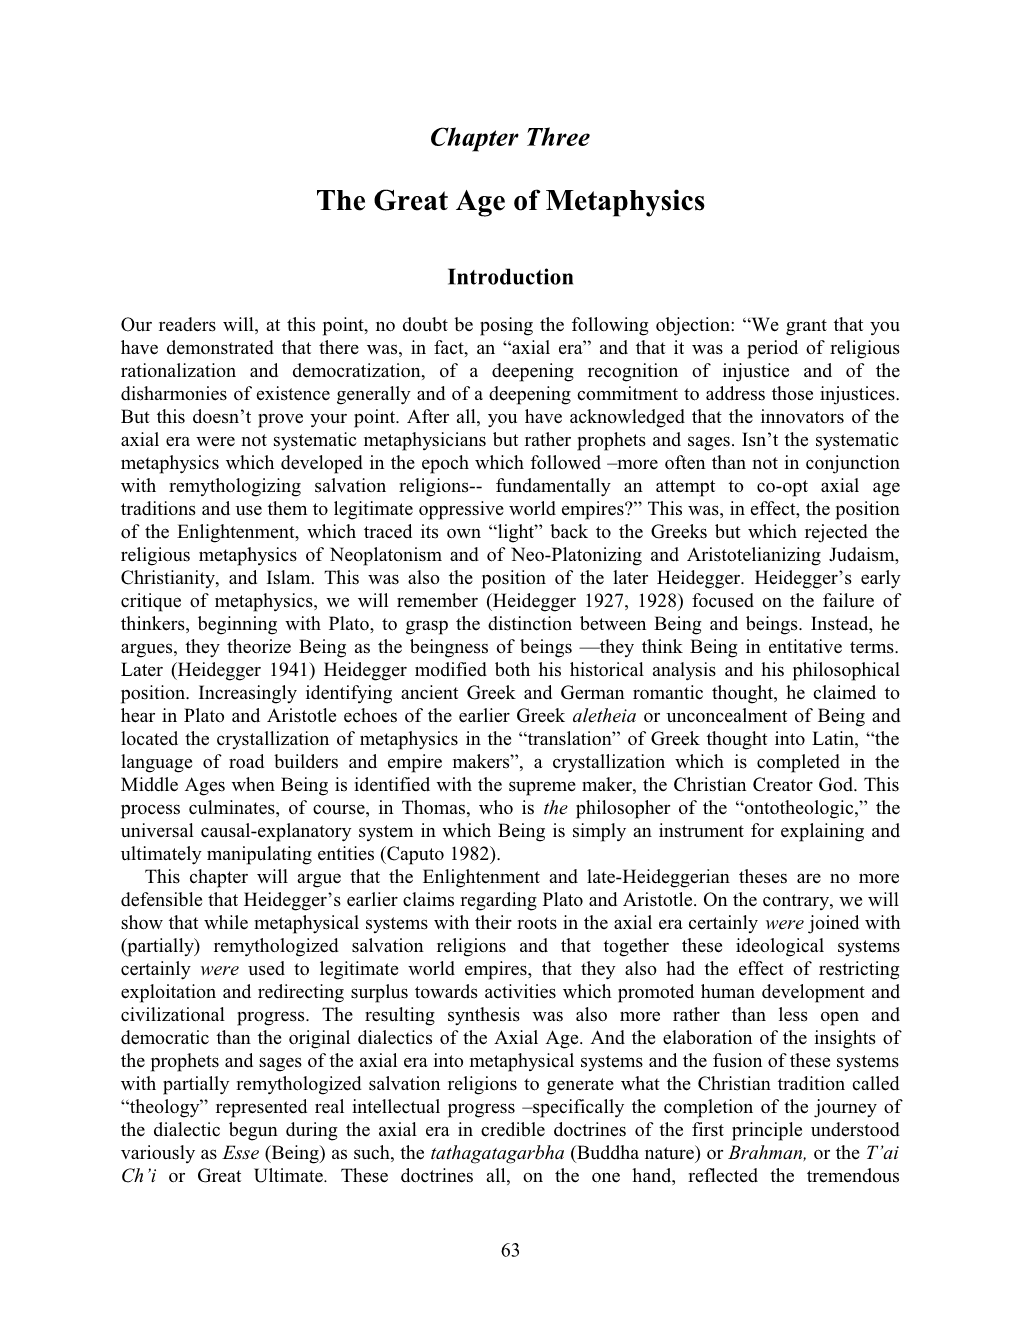 The Great Age of Metaphysics